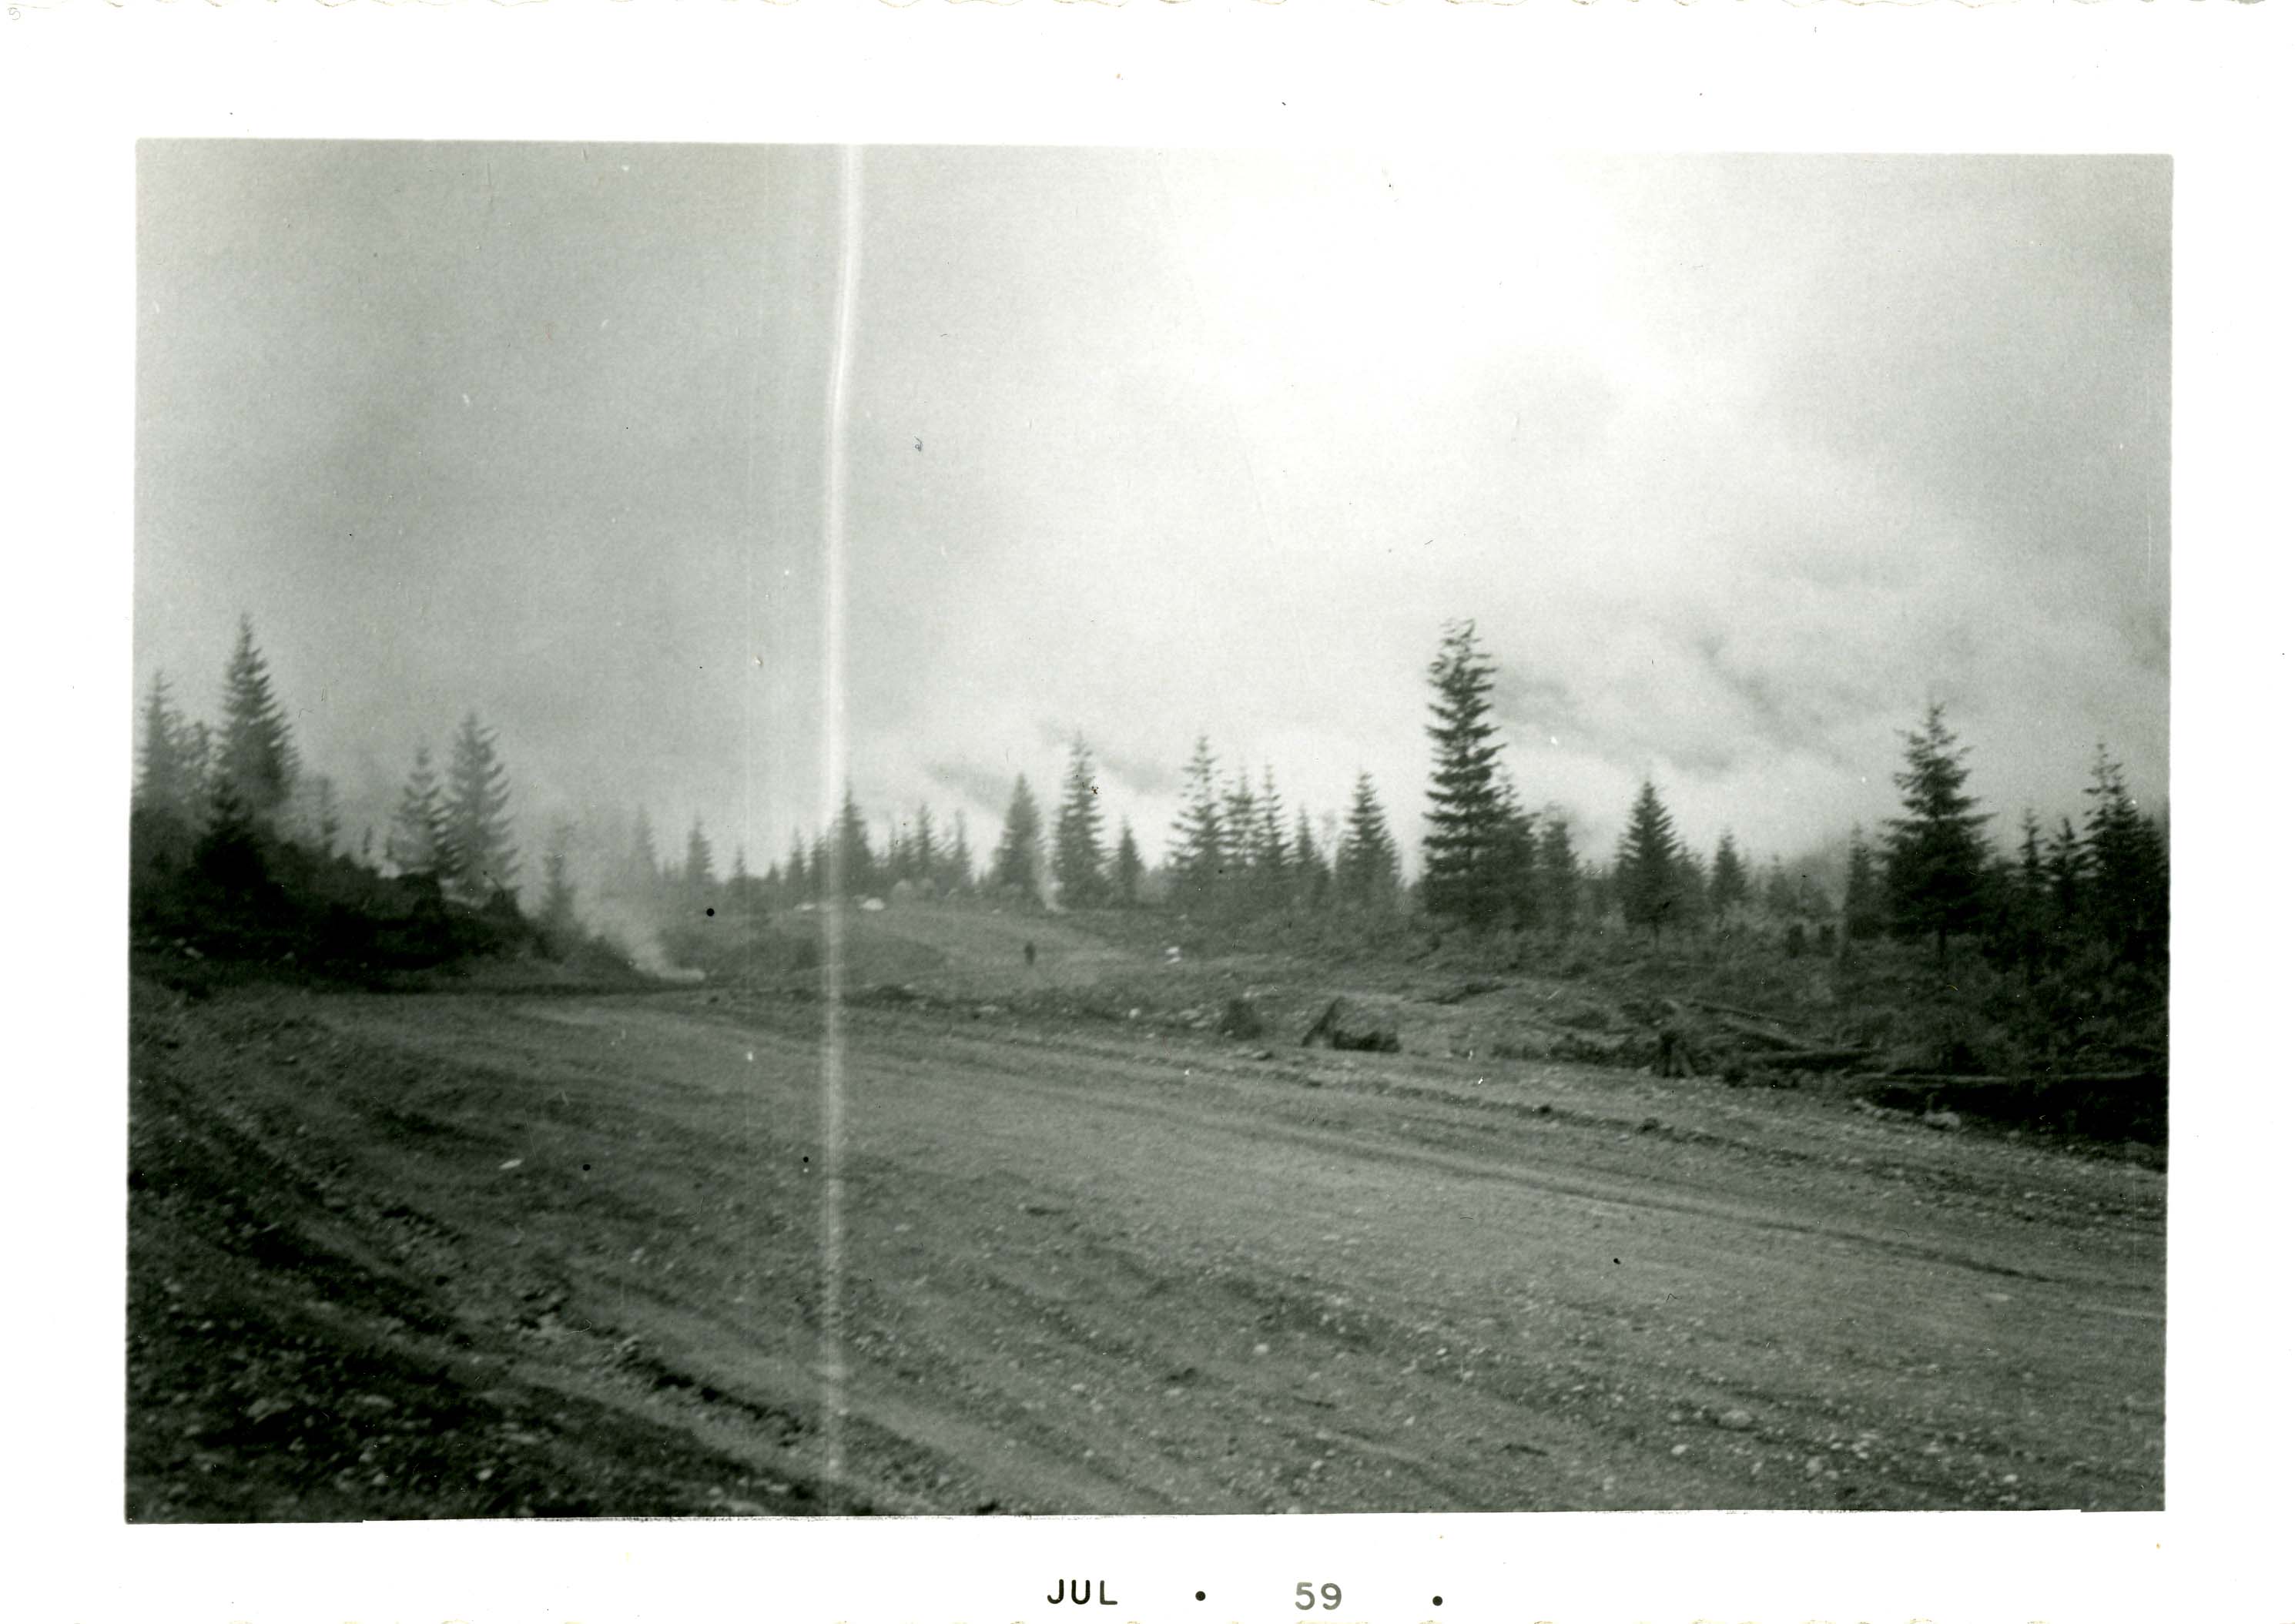 Westwood Race Track Before Paving, July 1959 (JPG) Opens in new window